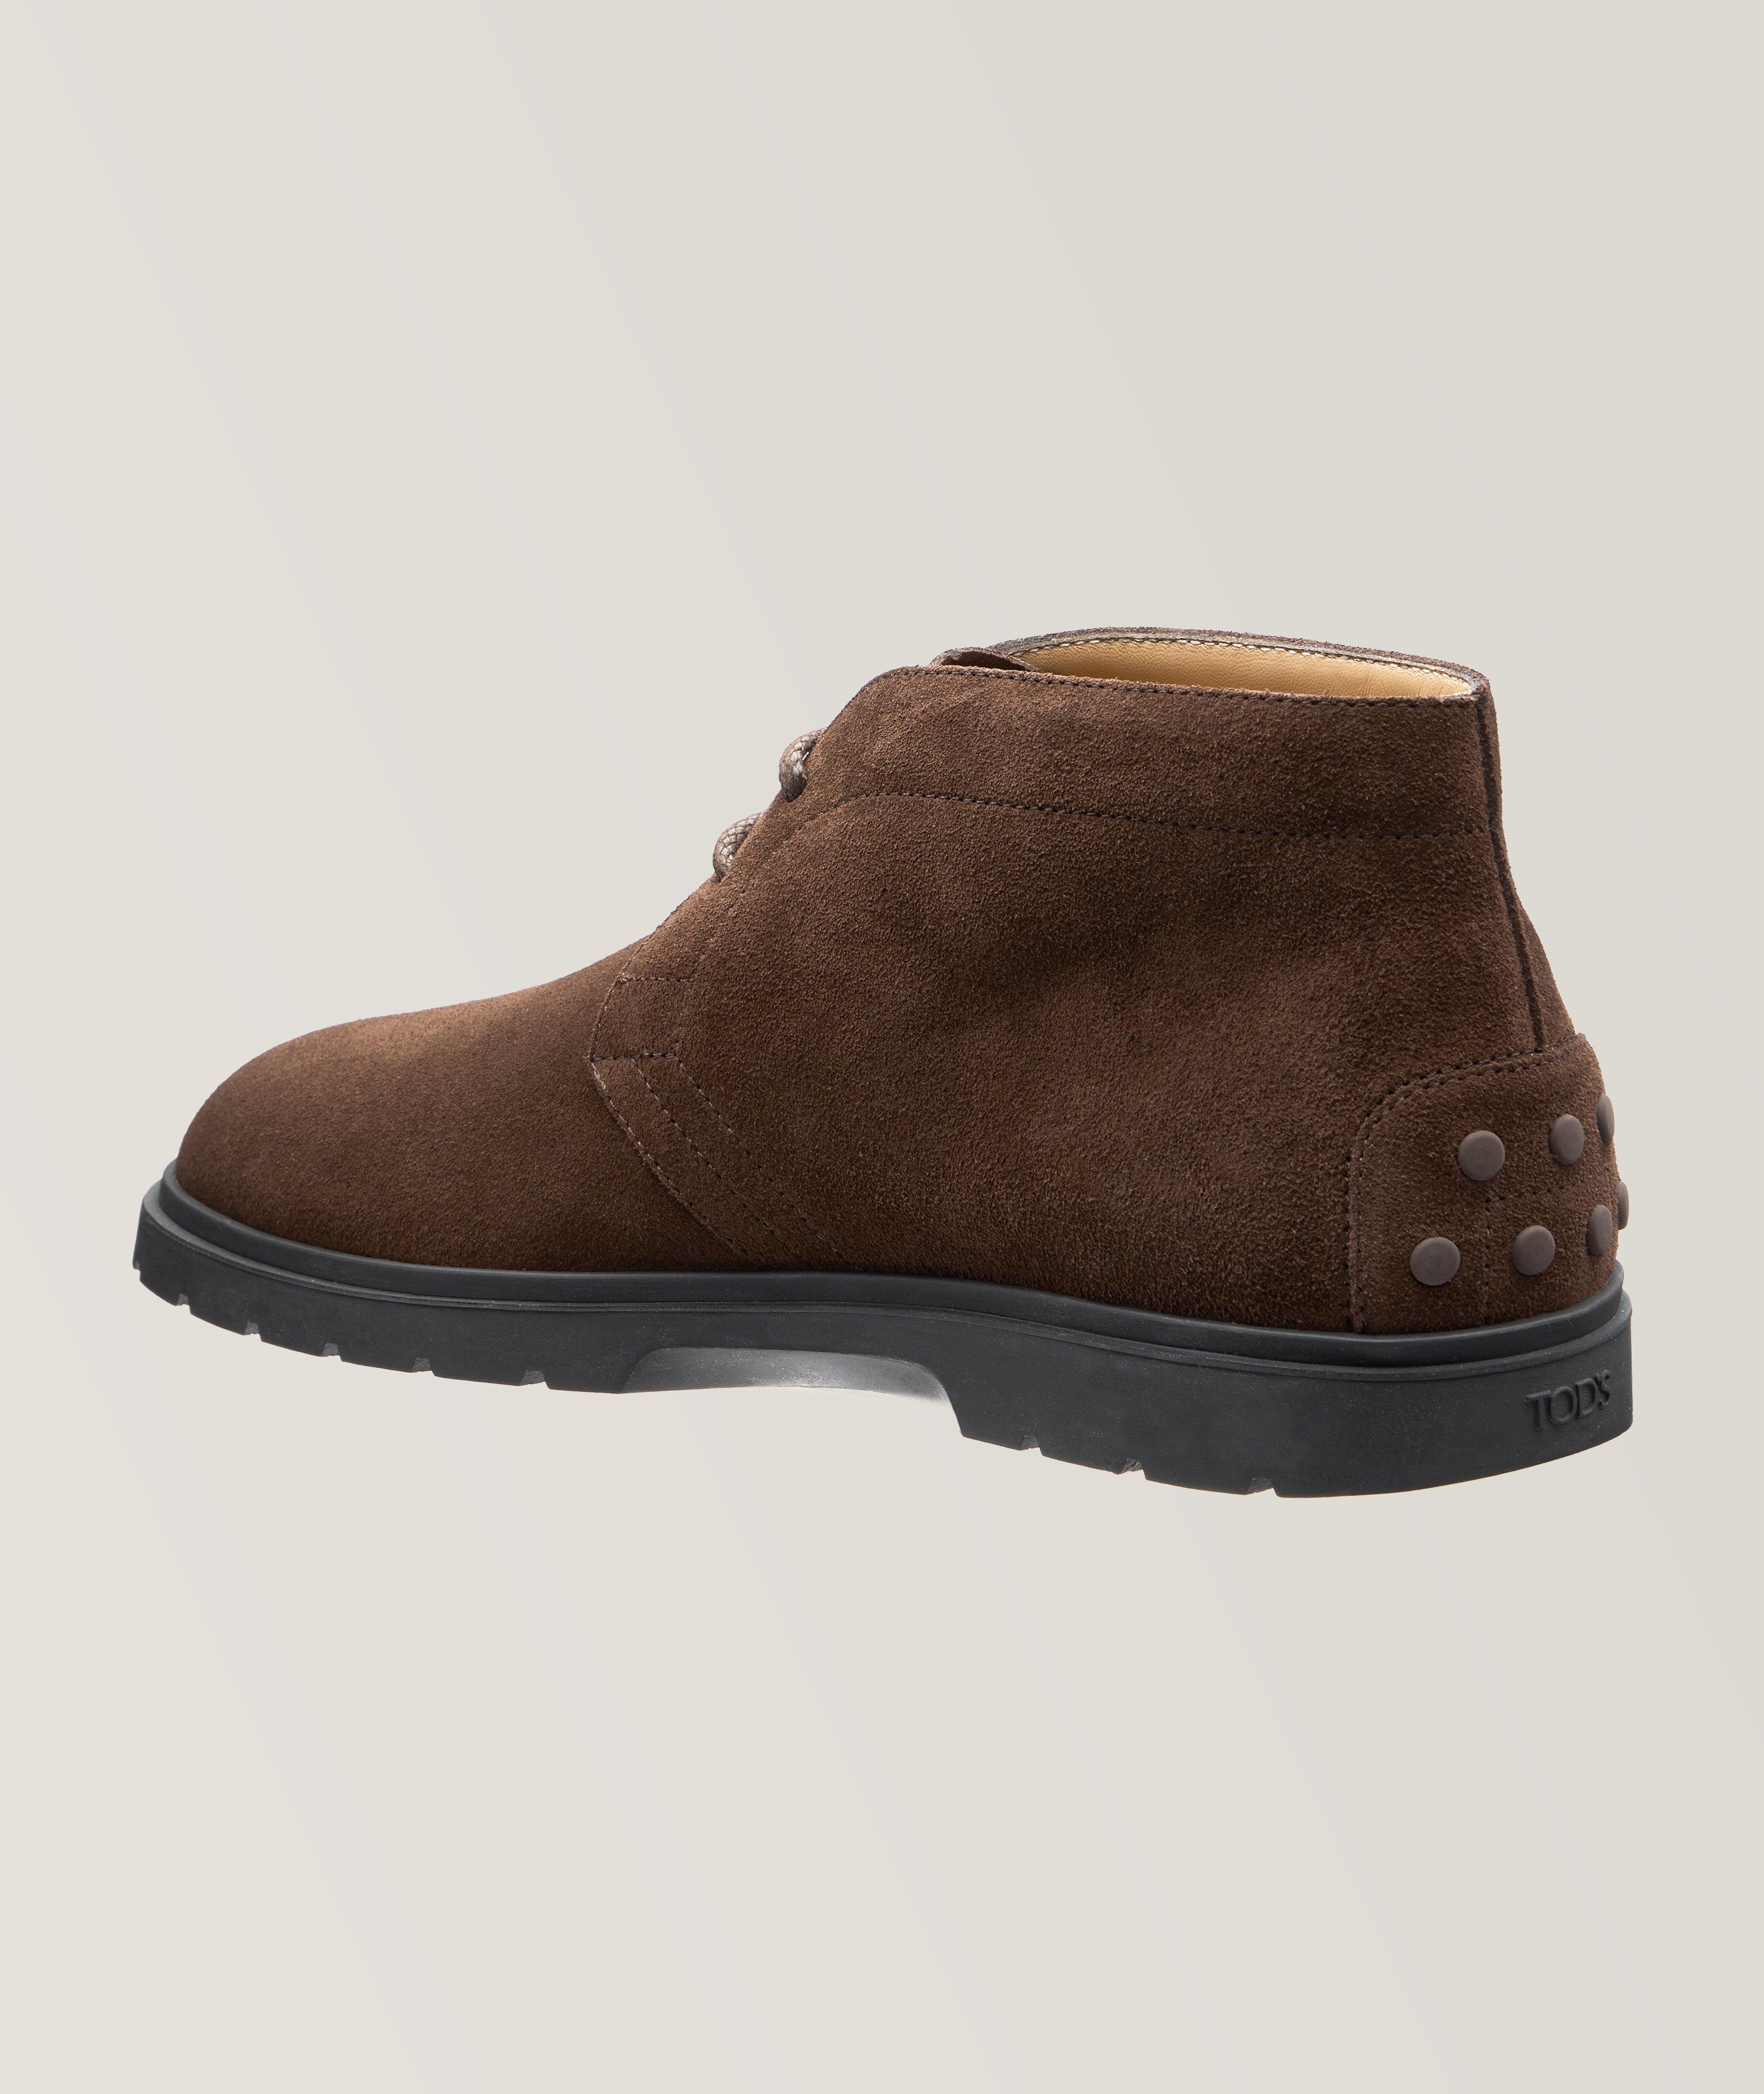 Suede Desert Boots image 1